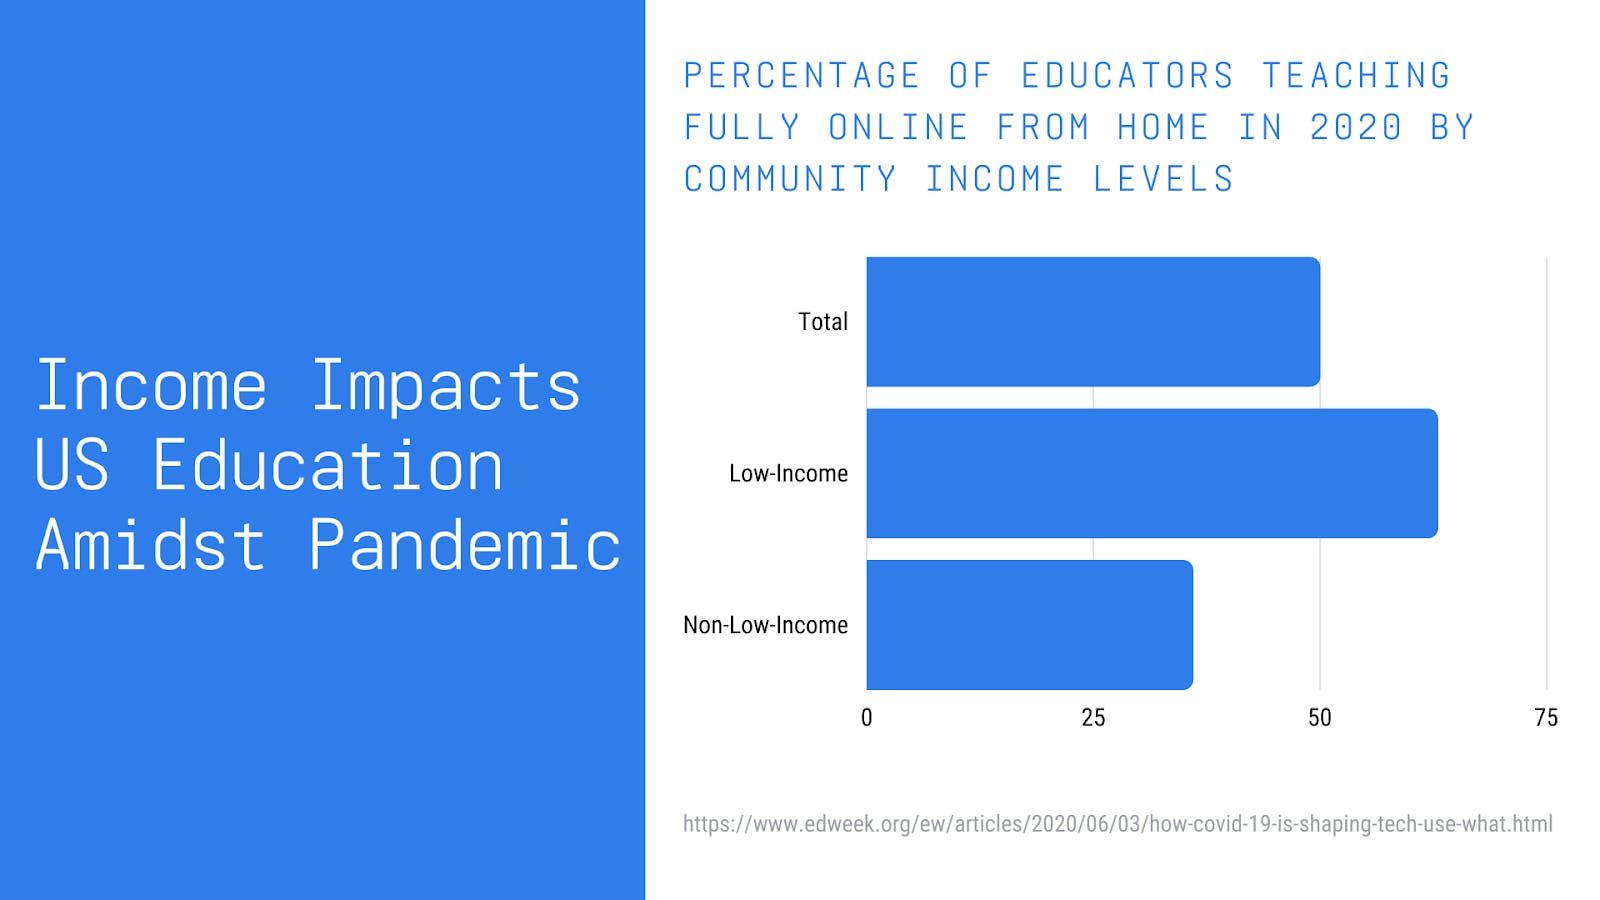 bar graph showing income levels of communities with 100% online learning in 2020